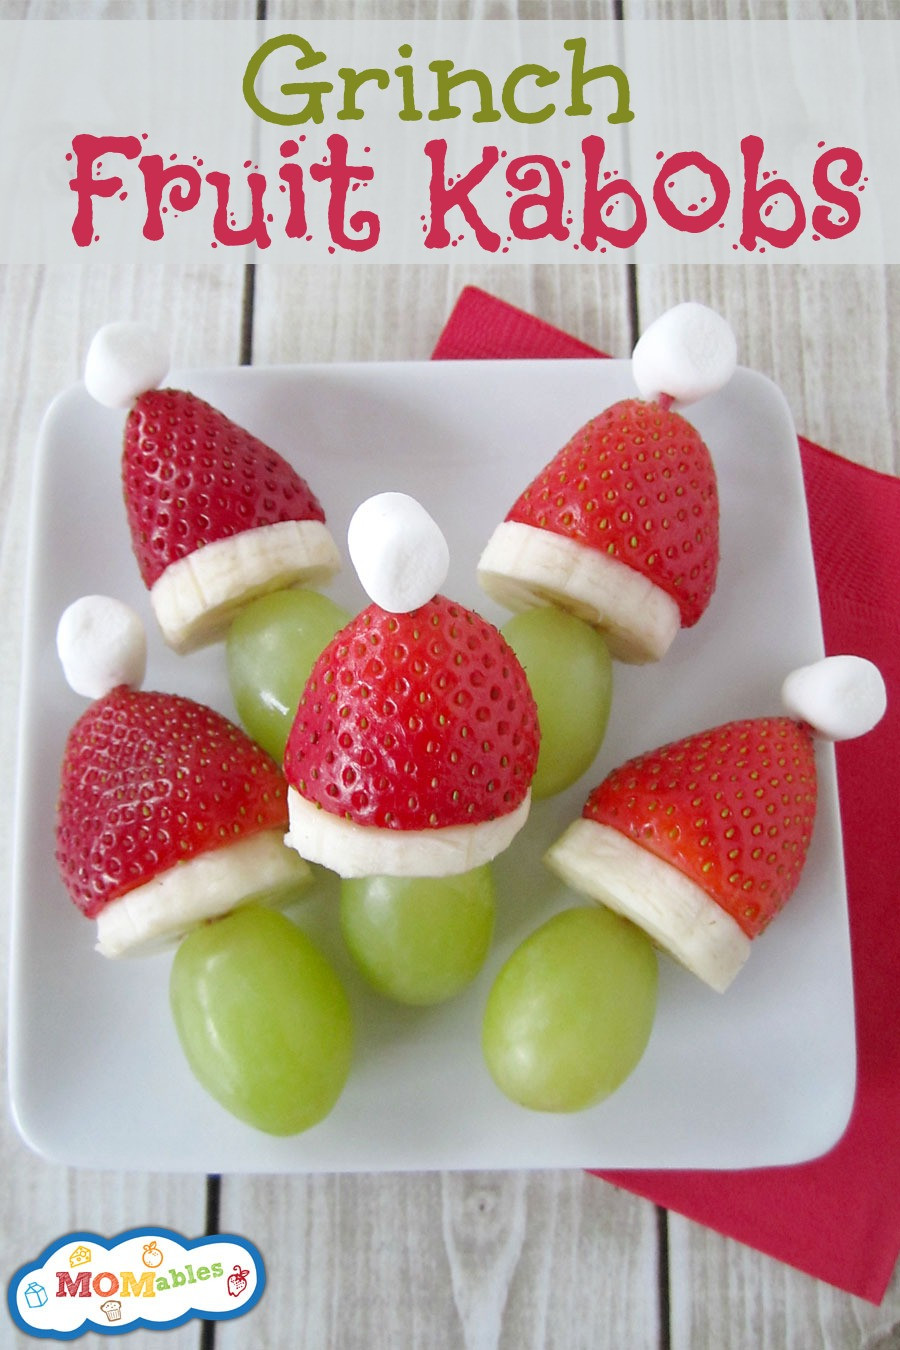 Fun Christmas Appetizers
 7 Fun & Healthy Food Ideas for the School Party